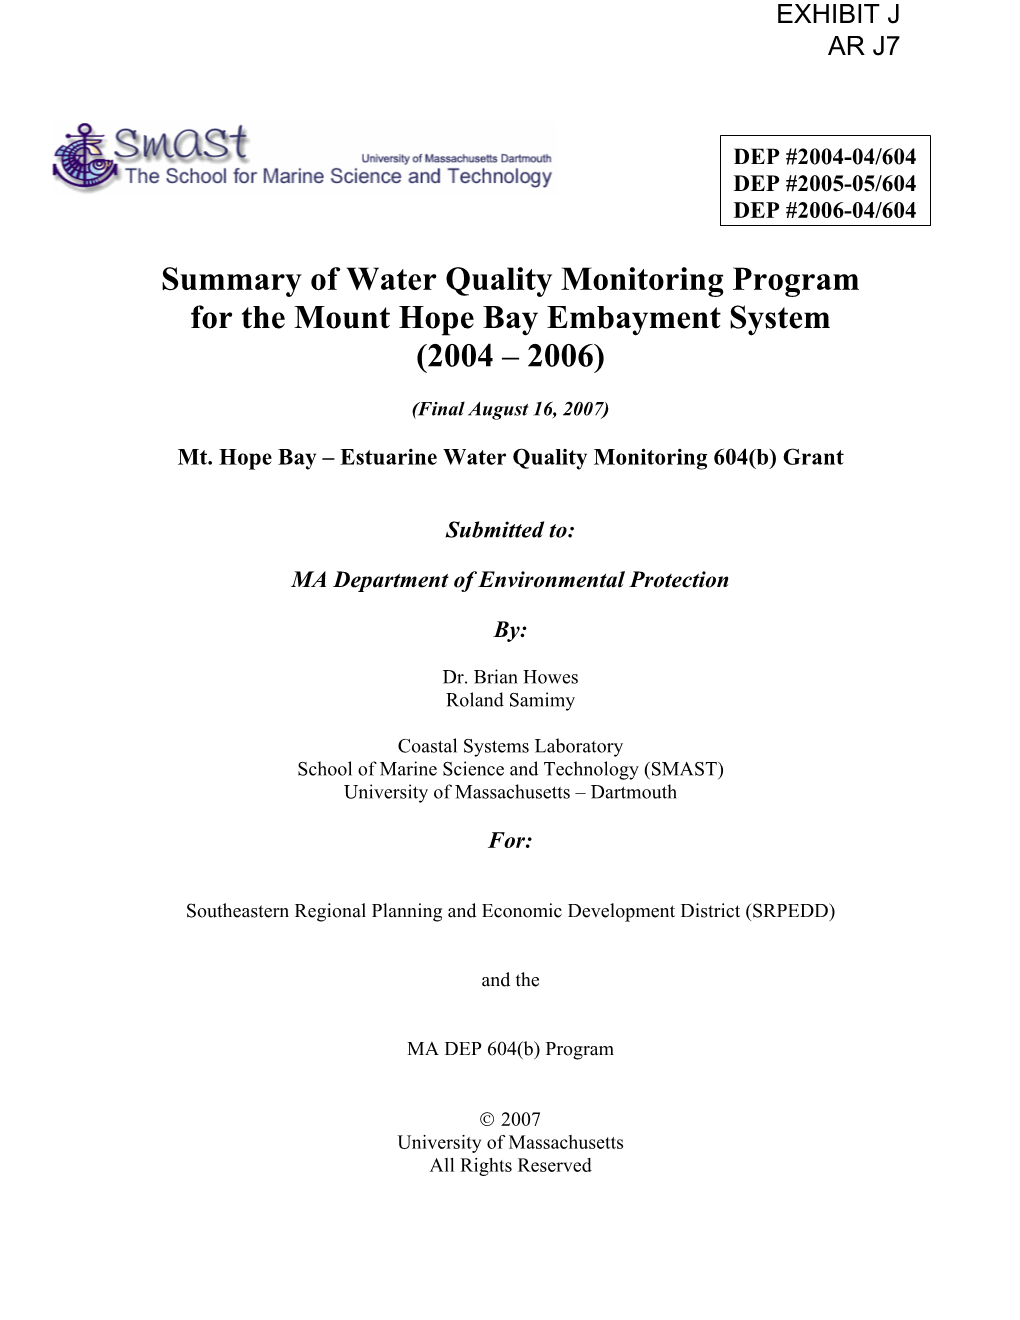 Summary of Water Quality Monitoring Program for the Mount Hope Bay Embayment System (2004 – 2006)